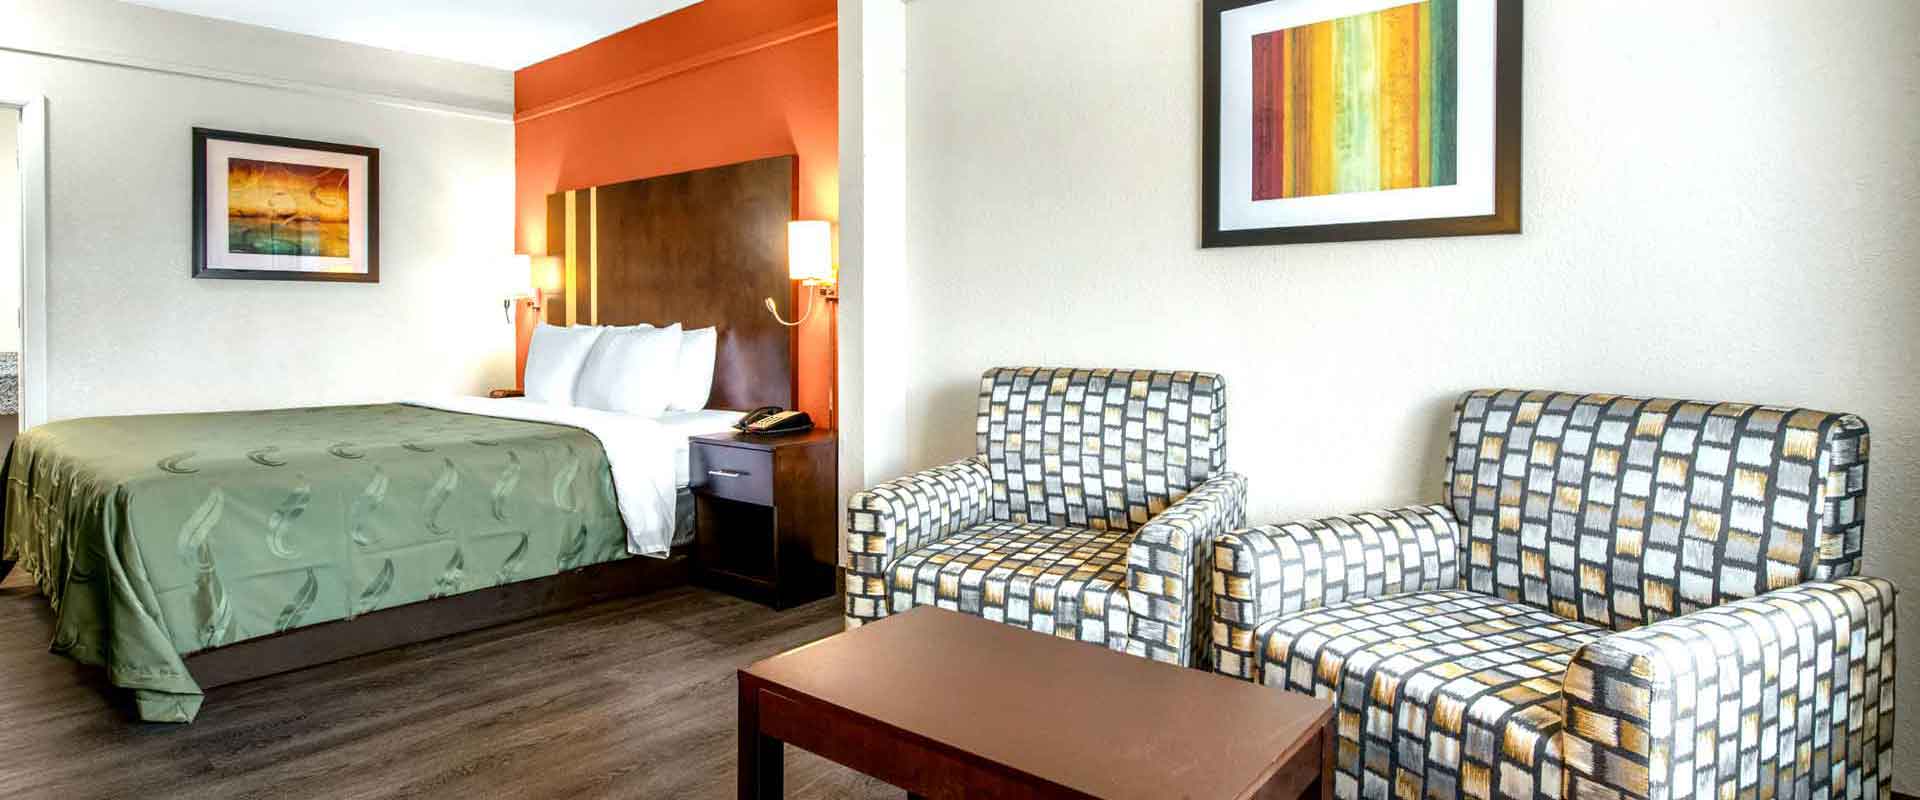 Jacksonville Inn and Suites | Jacksonville Reasonable Rates Newly Remodeled